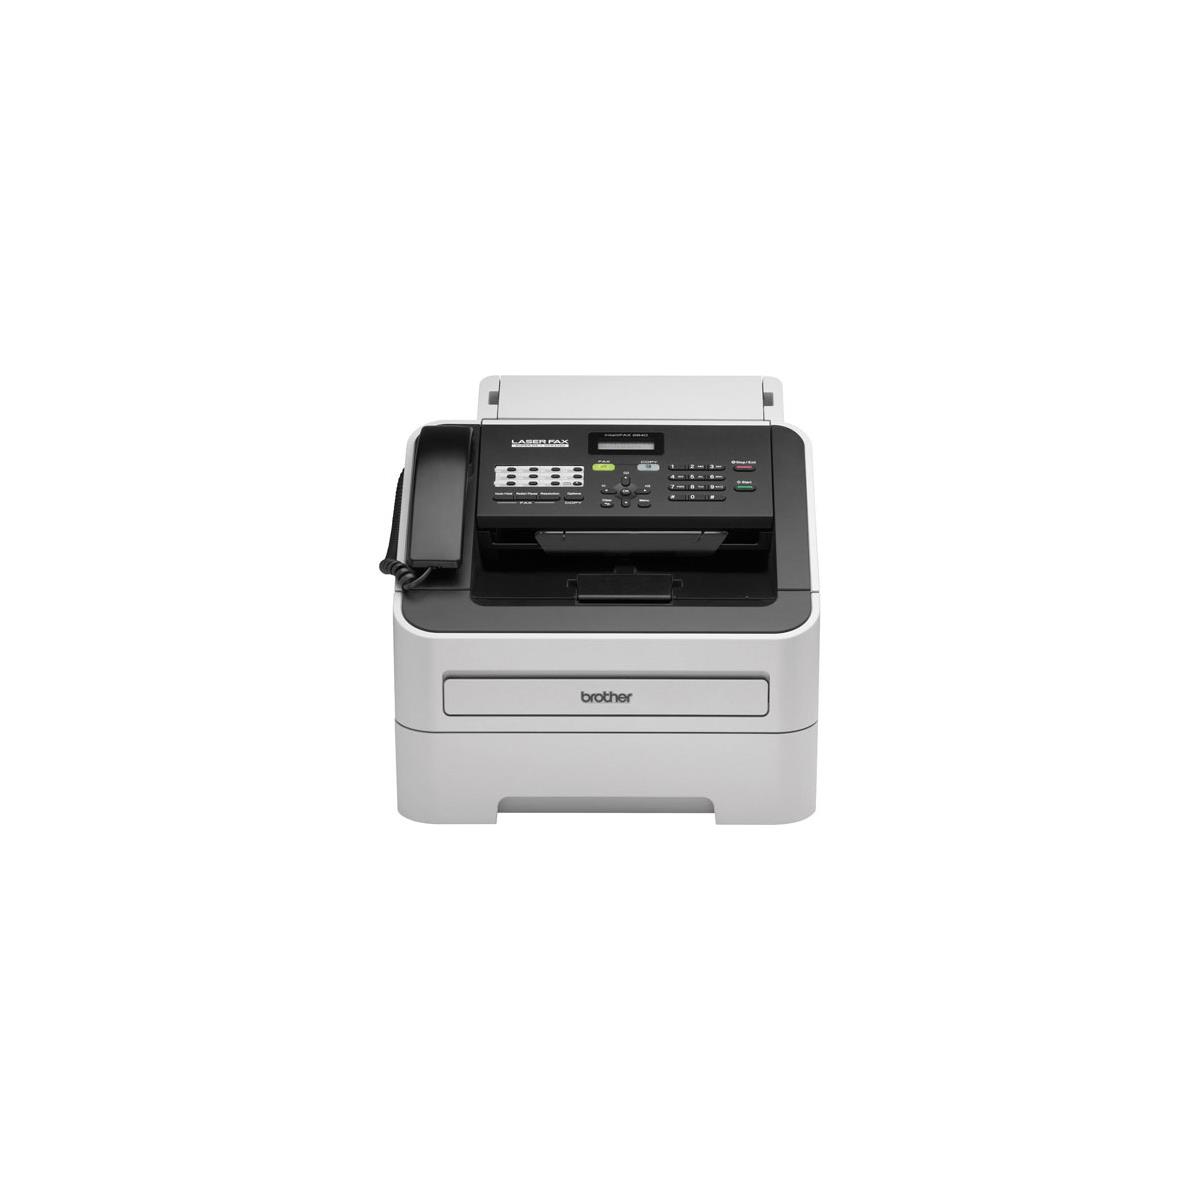 Image of Brother IntelliFax-2840 High-Speed Laser Fax Machine